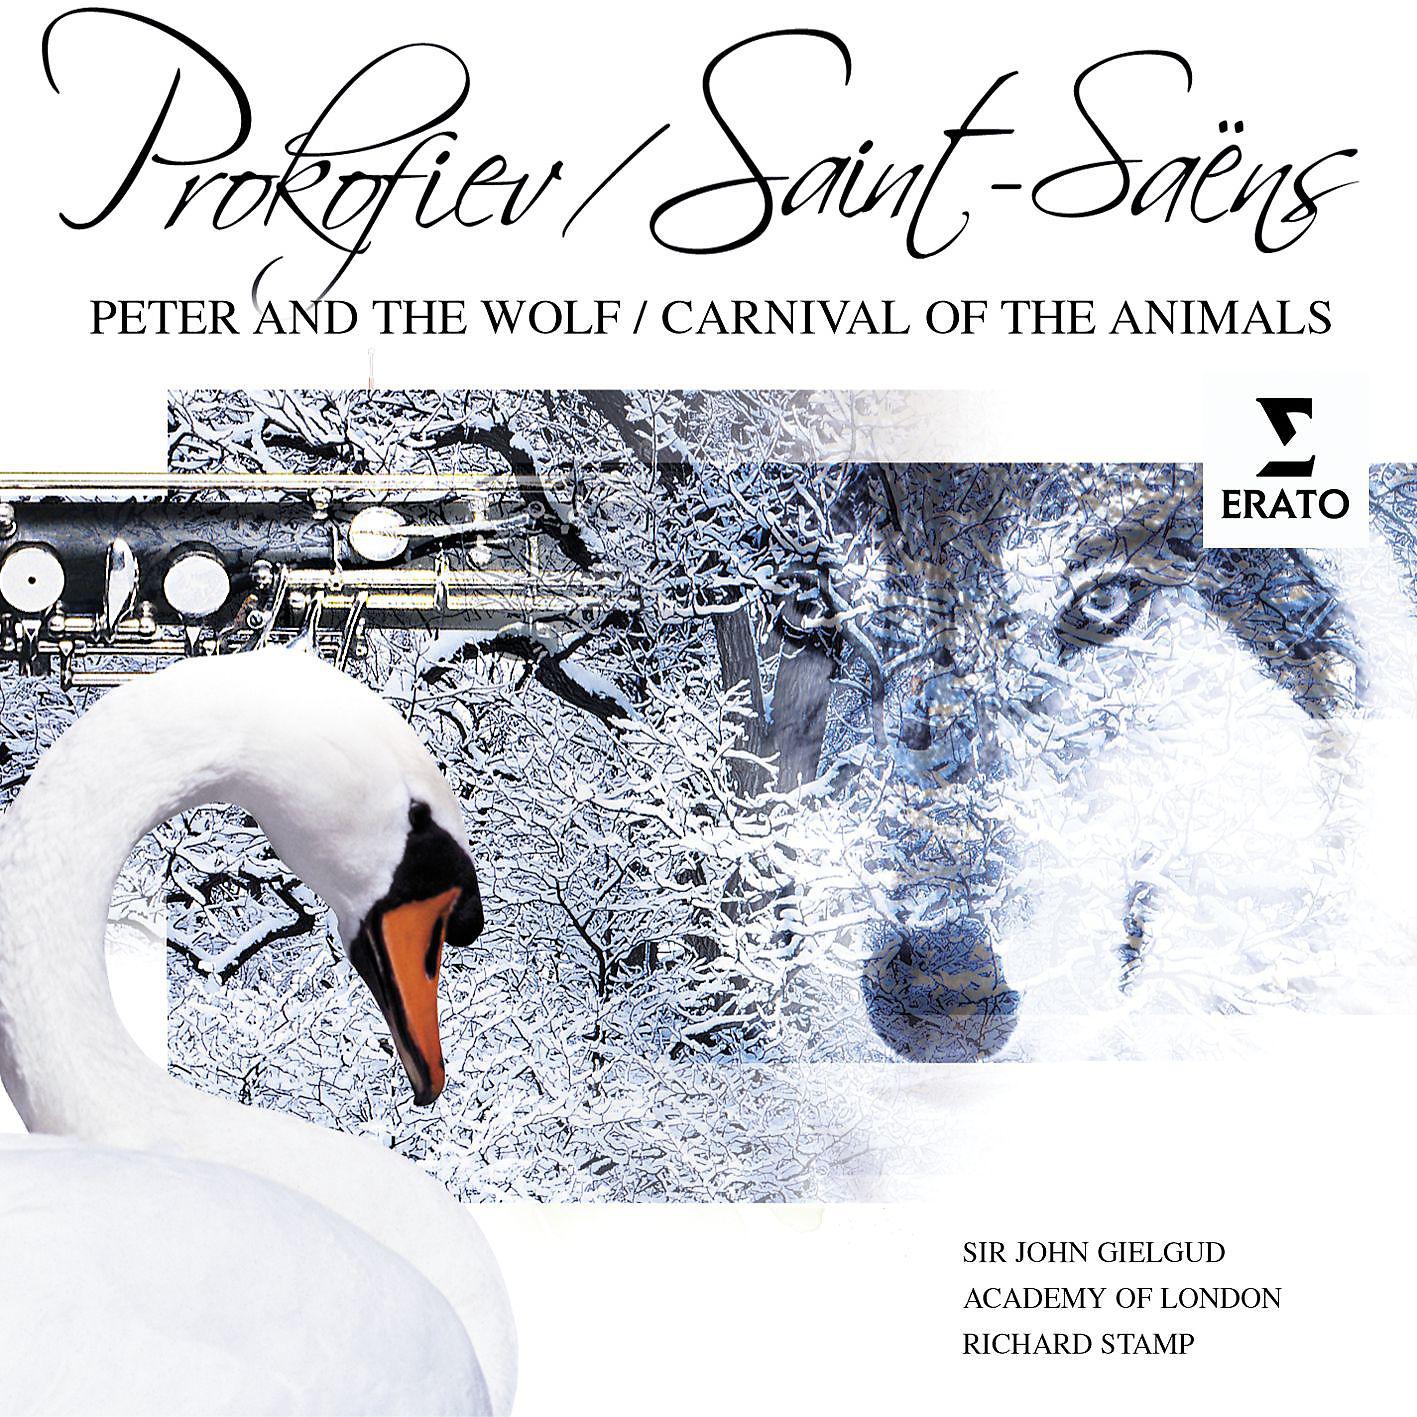 Постер альбома Prokofiev: Peter and the Wolf - Saint-Saëns: Carnival of the Animals